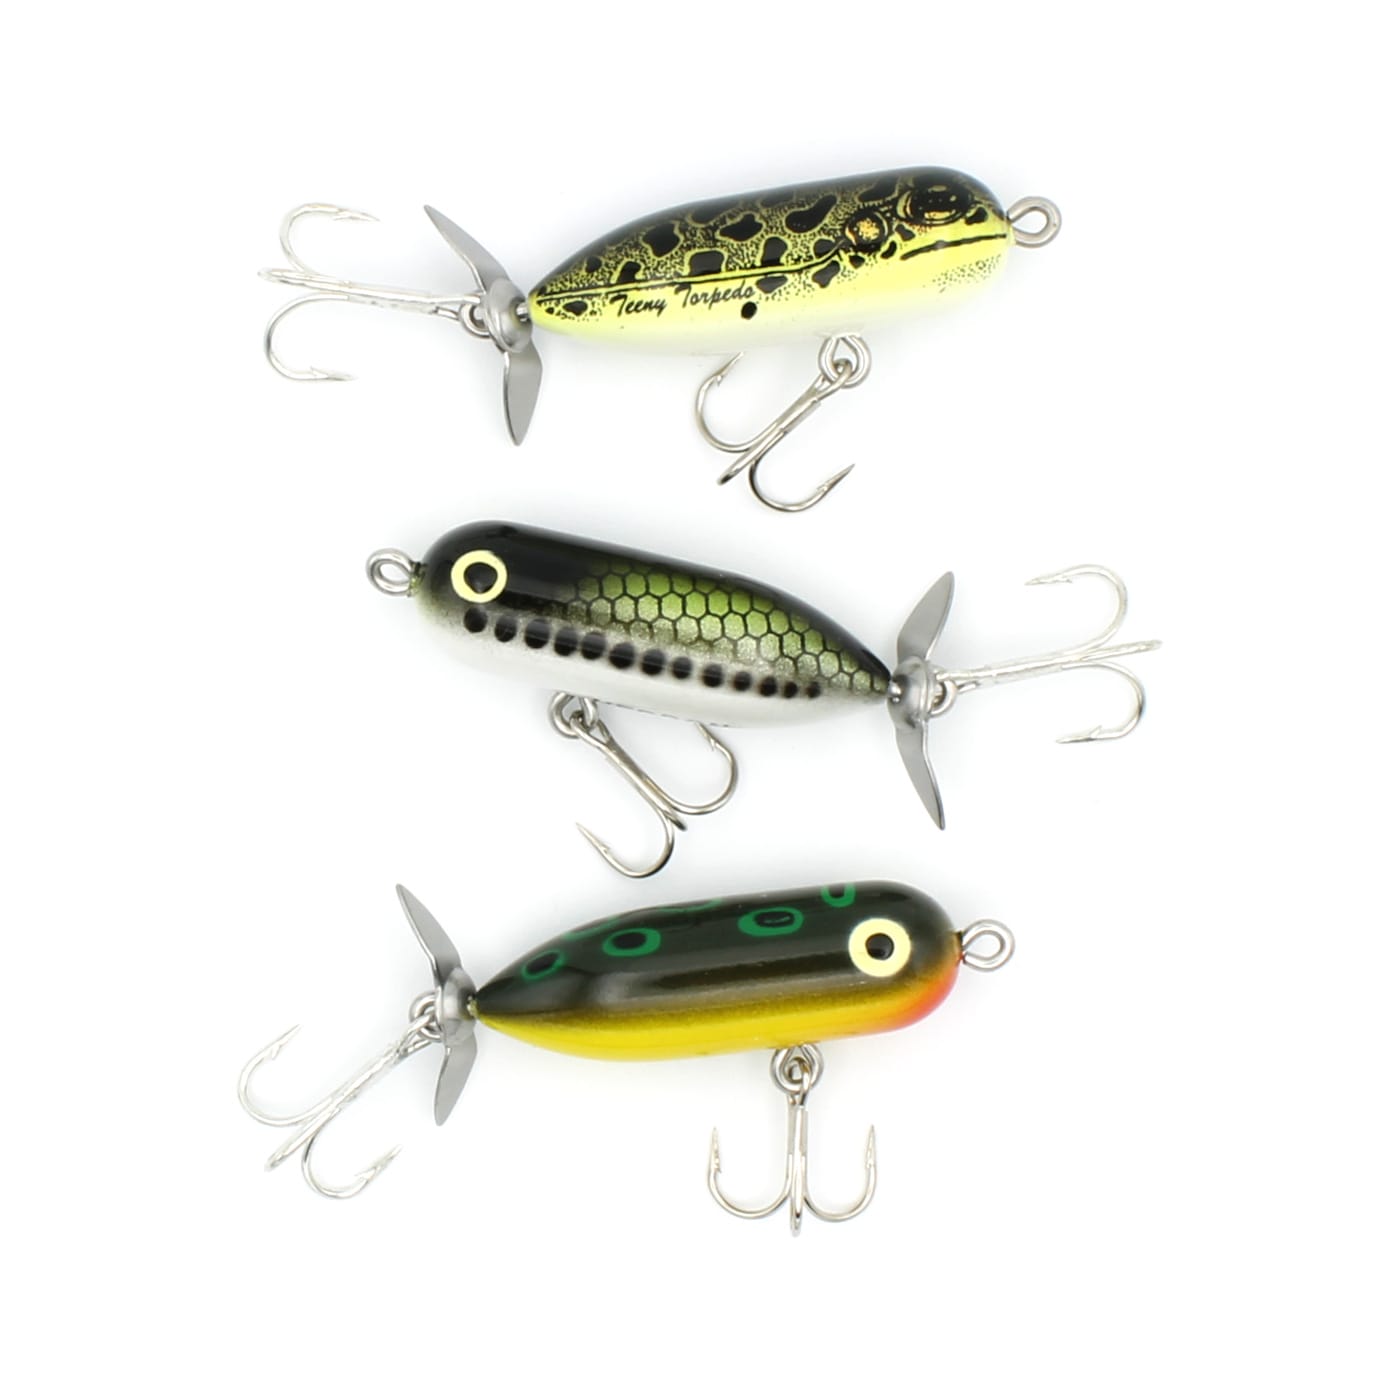 Heddon Fishing Lure Collection of 4 Vintage Tiny Torpedo -  Finland